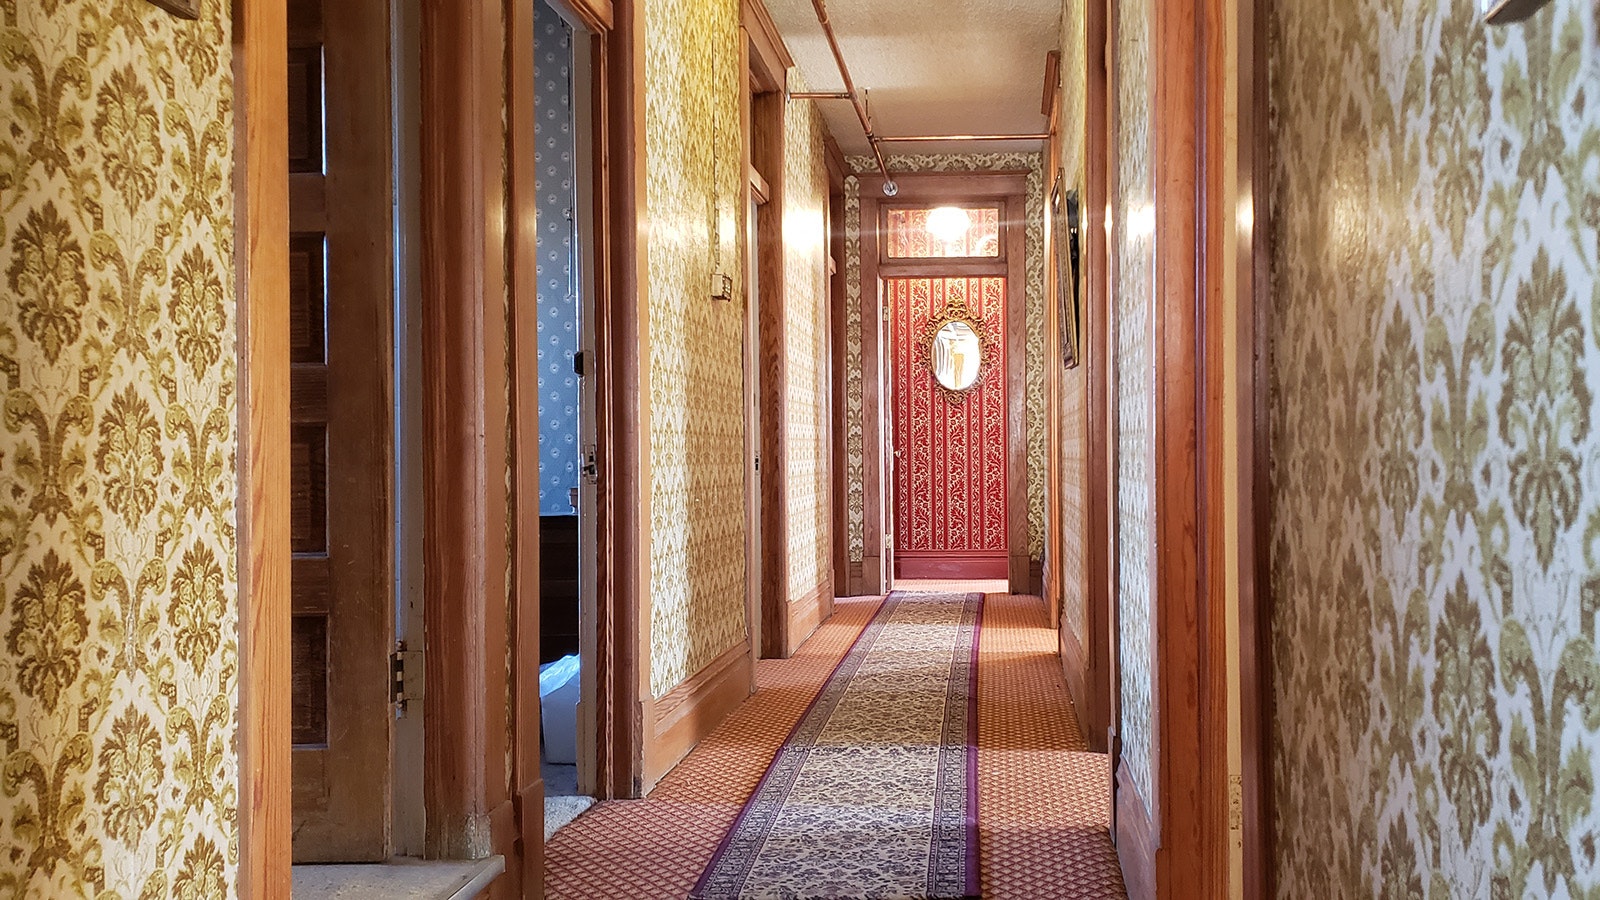 The hallway that leads to the Owen Wister Suite.